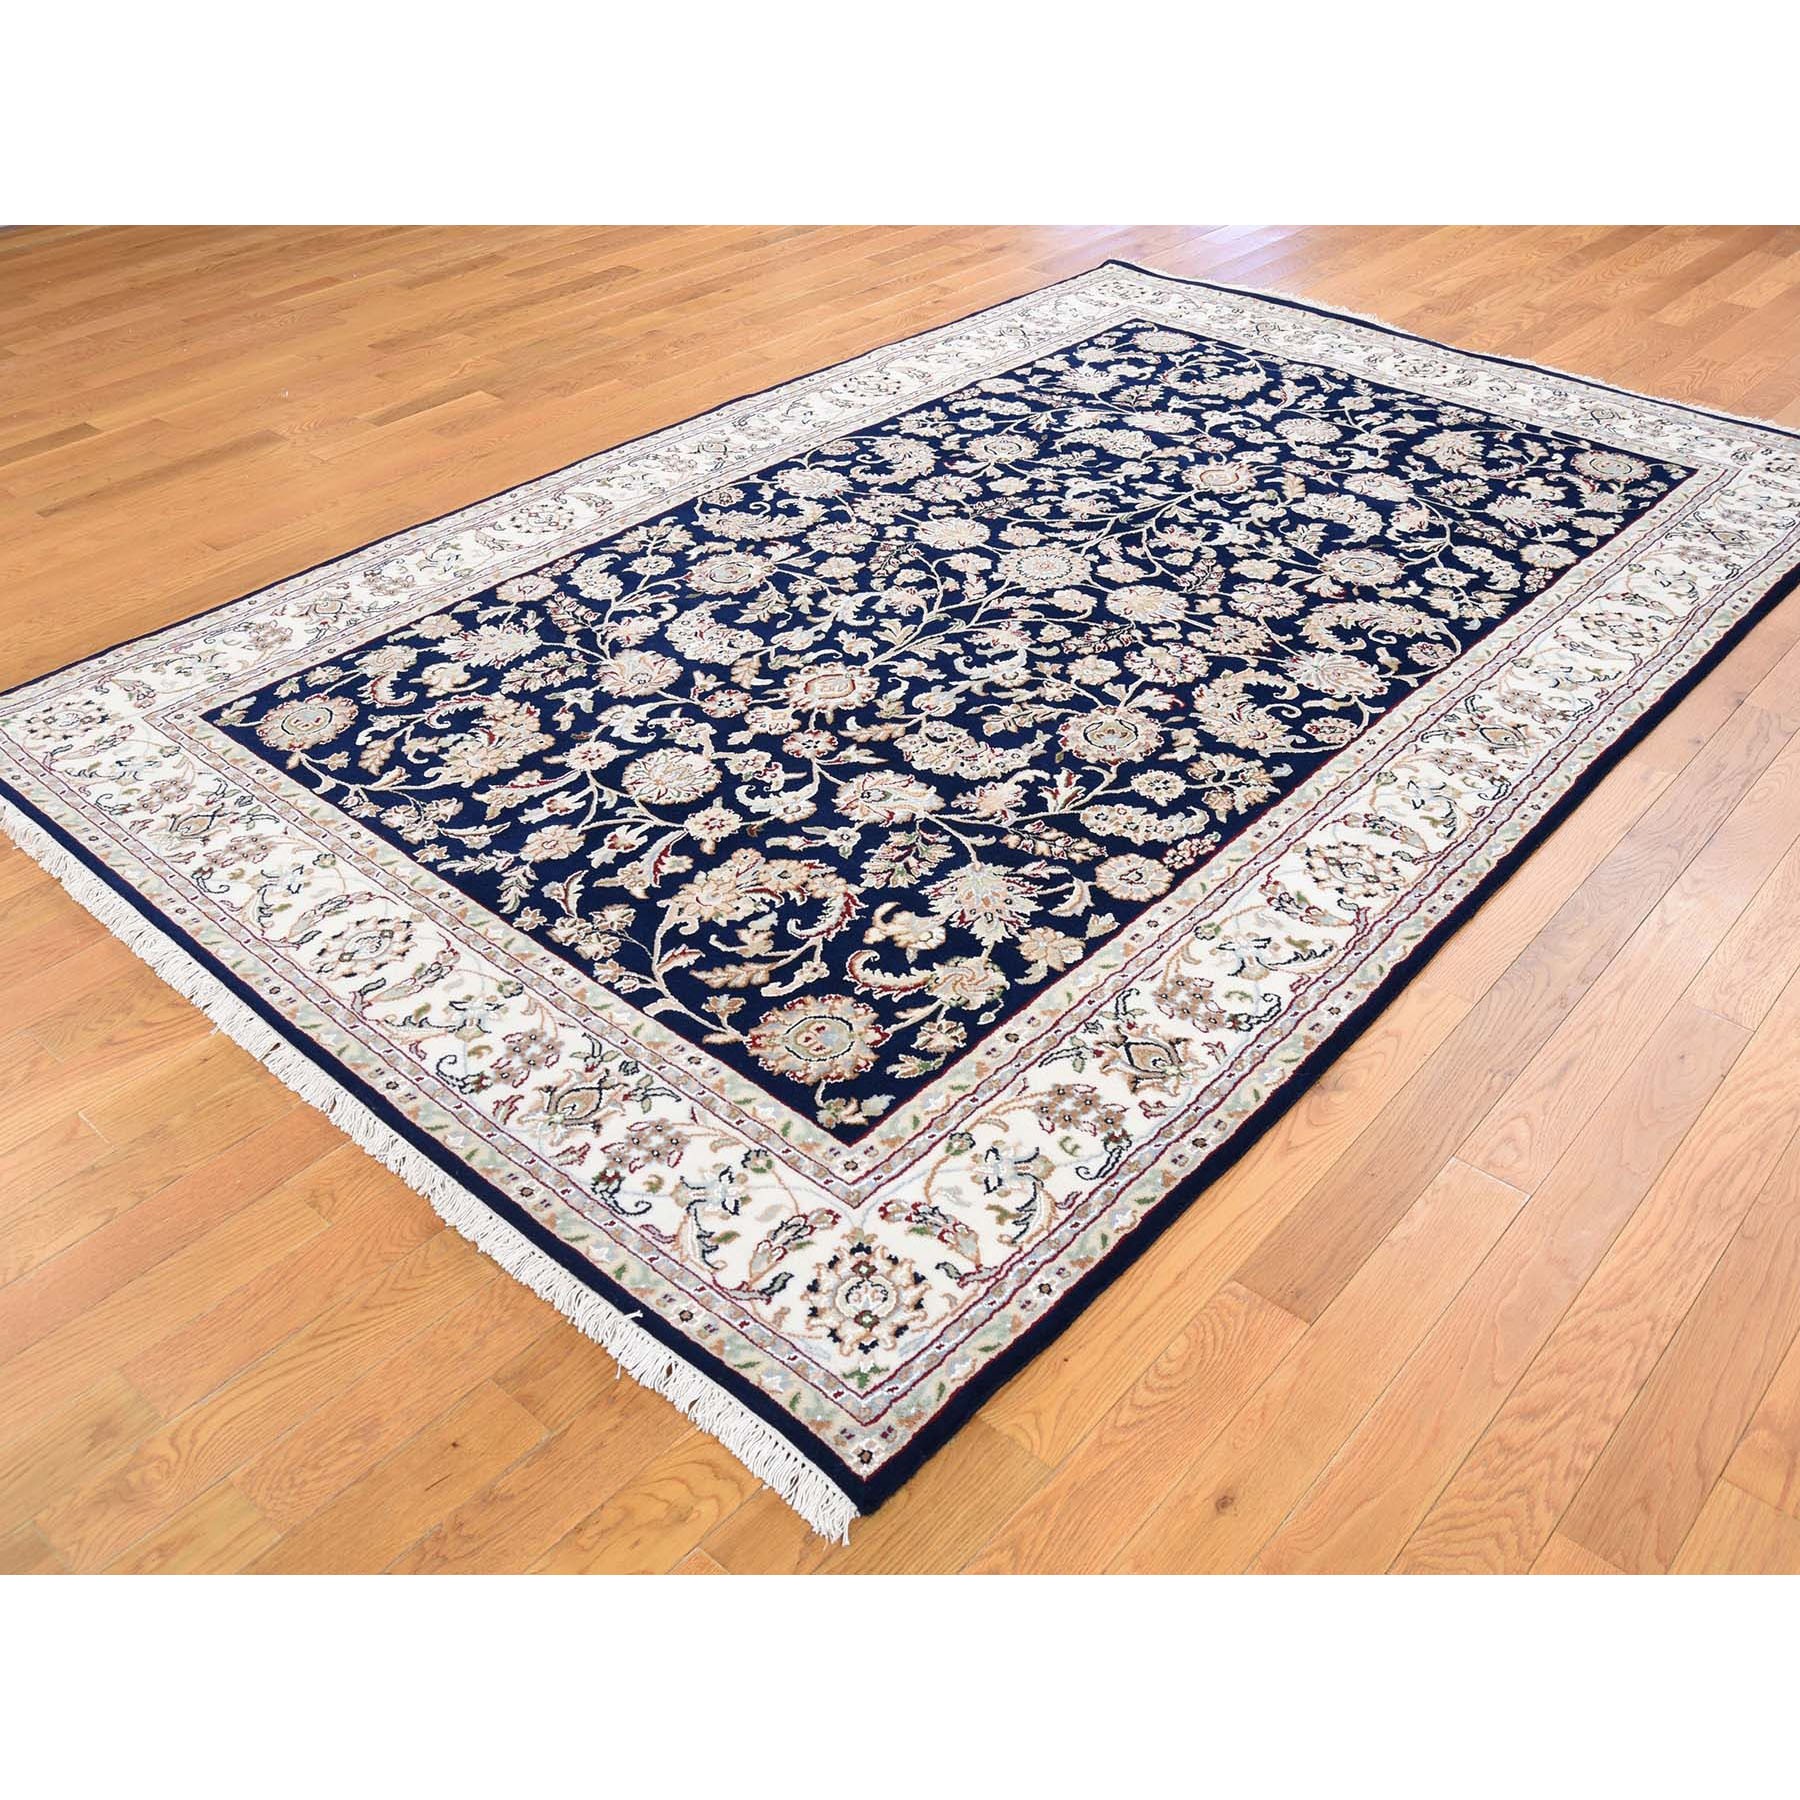 6-1 x9- Wool and Silk 250 KPSI All Over Design Navy Blue Nain Hand-Knotted Oriental Rug 